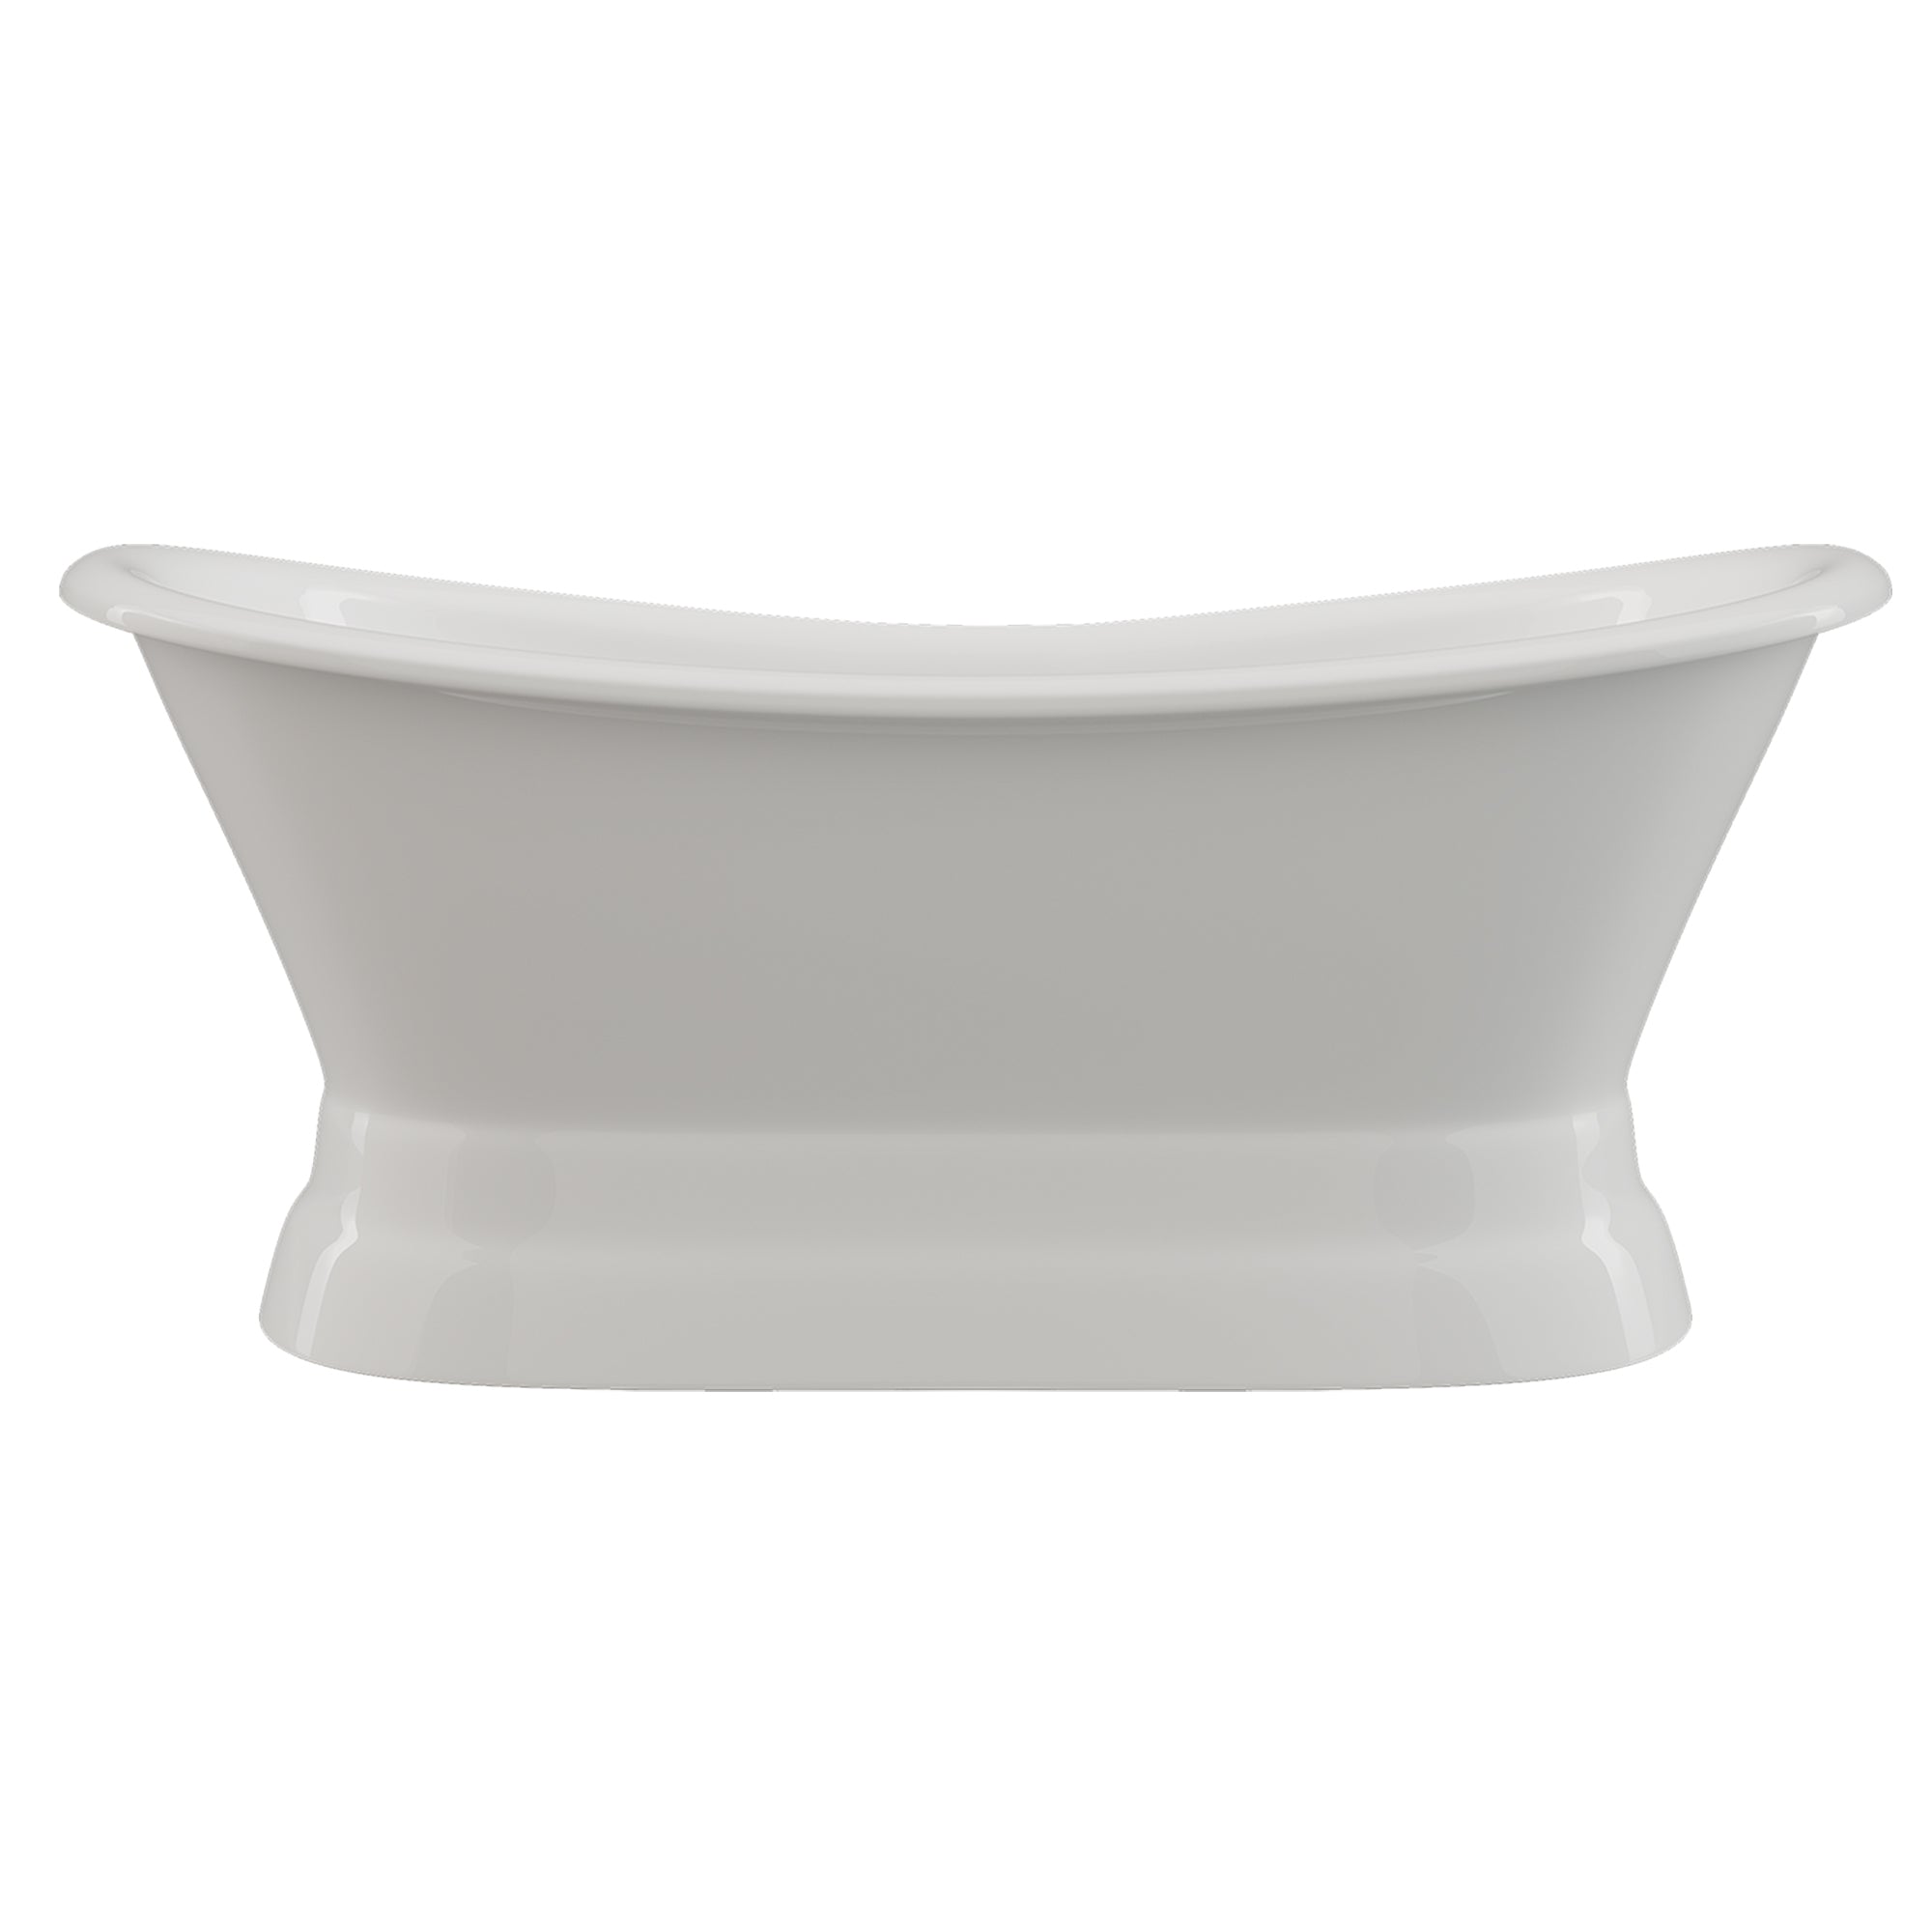 Cambridge Plumbing Double Slipper Cast Iron Pedestal Tub (Porcelain enamel interior and white paint exterior) with No Faucet Drillings DES-PED-NH - Vital Hydrotherapy